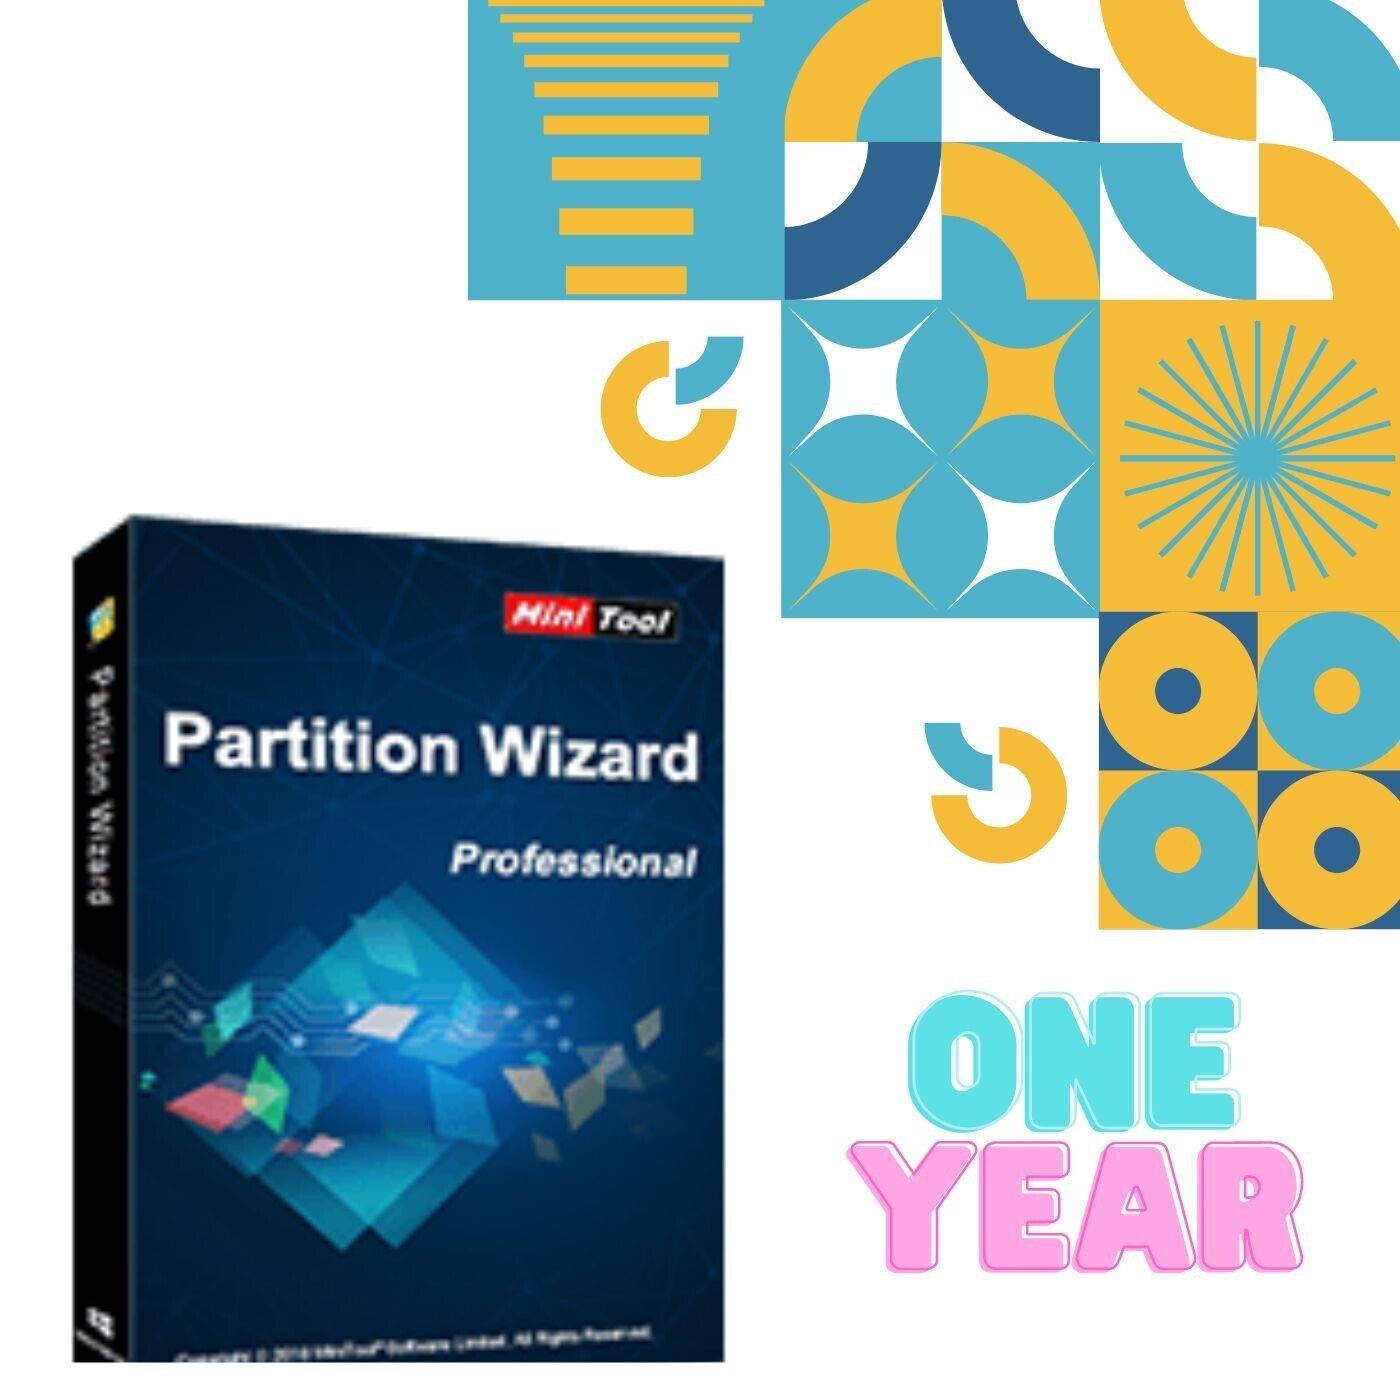 MiniTool Partition Wizard Pro one year Subscription  DVD